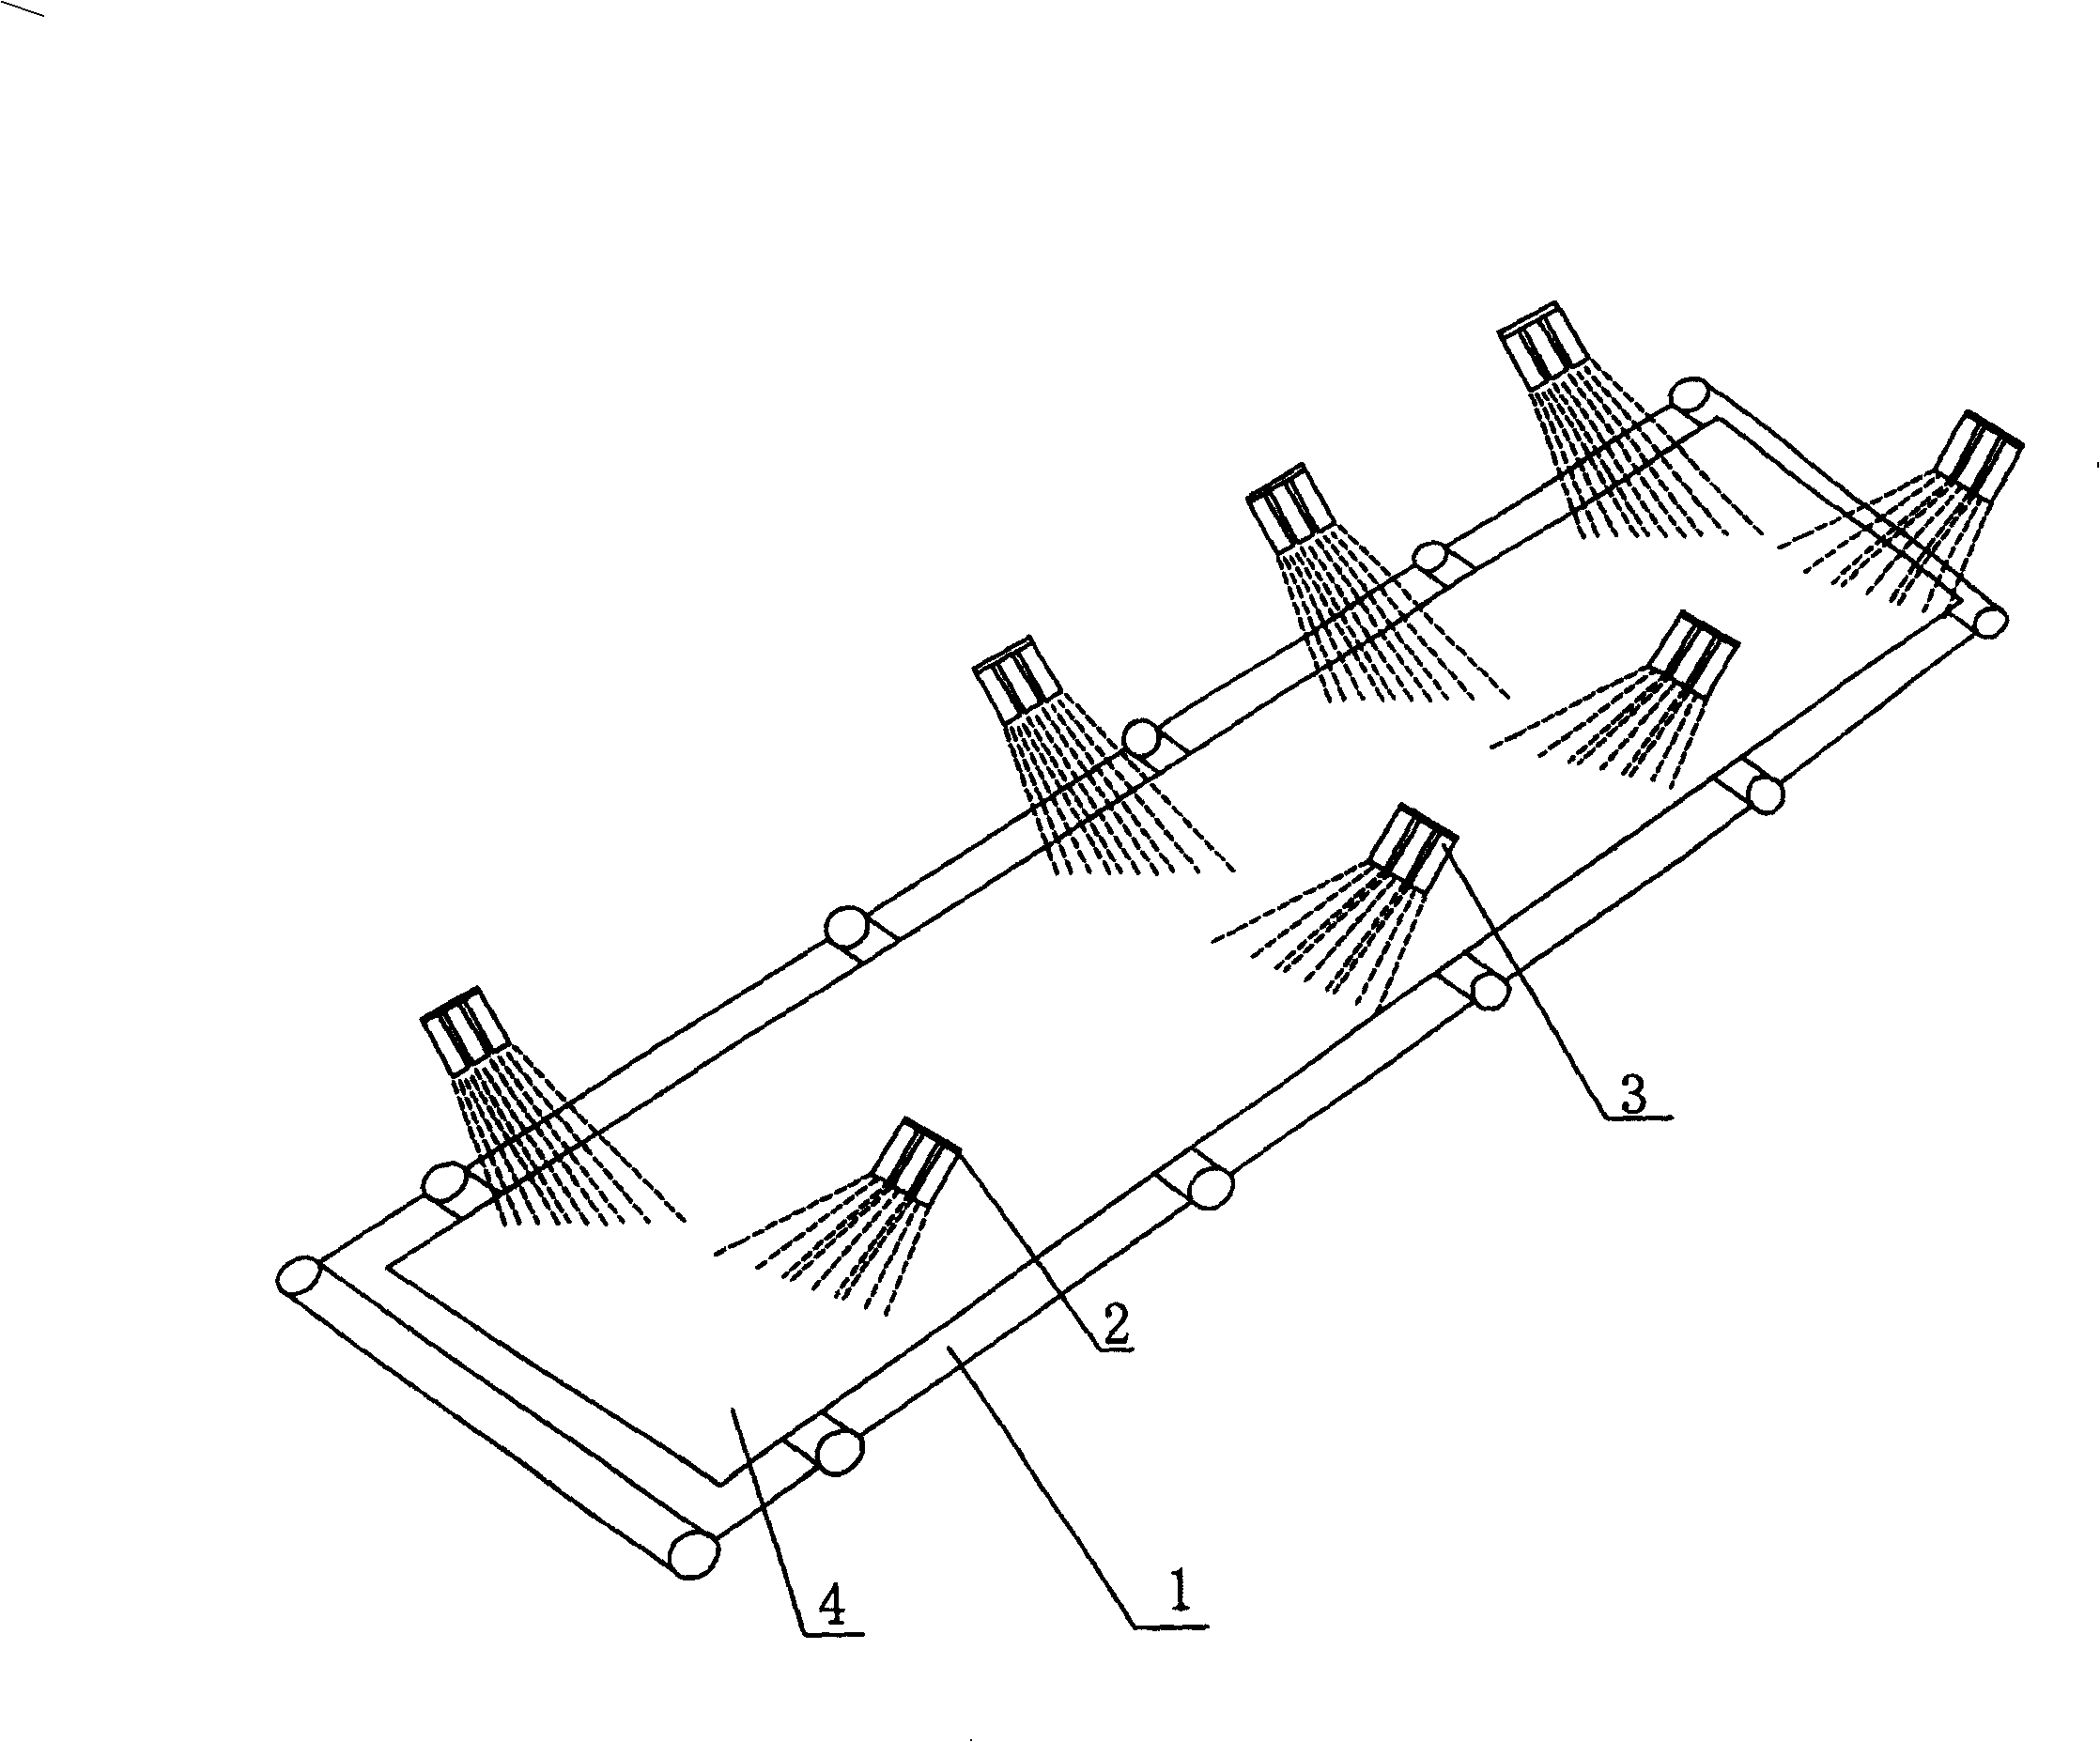 Laminated flowing cooling water side-jetting sweeping system after high-strength low-alloy steel being rolled